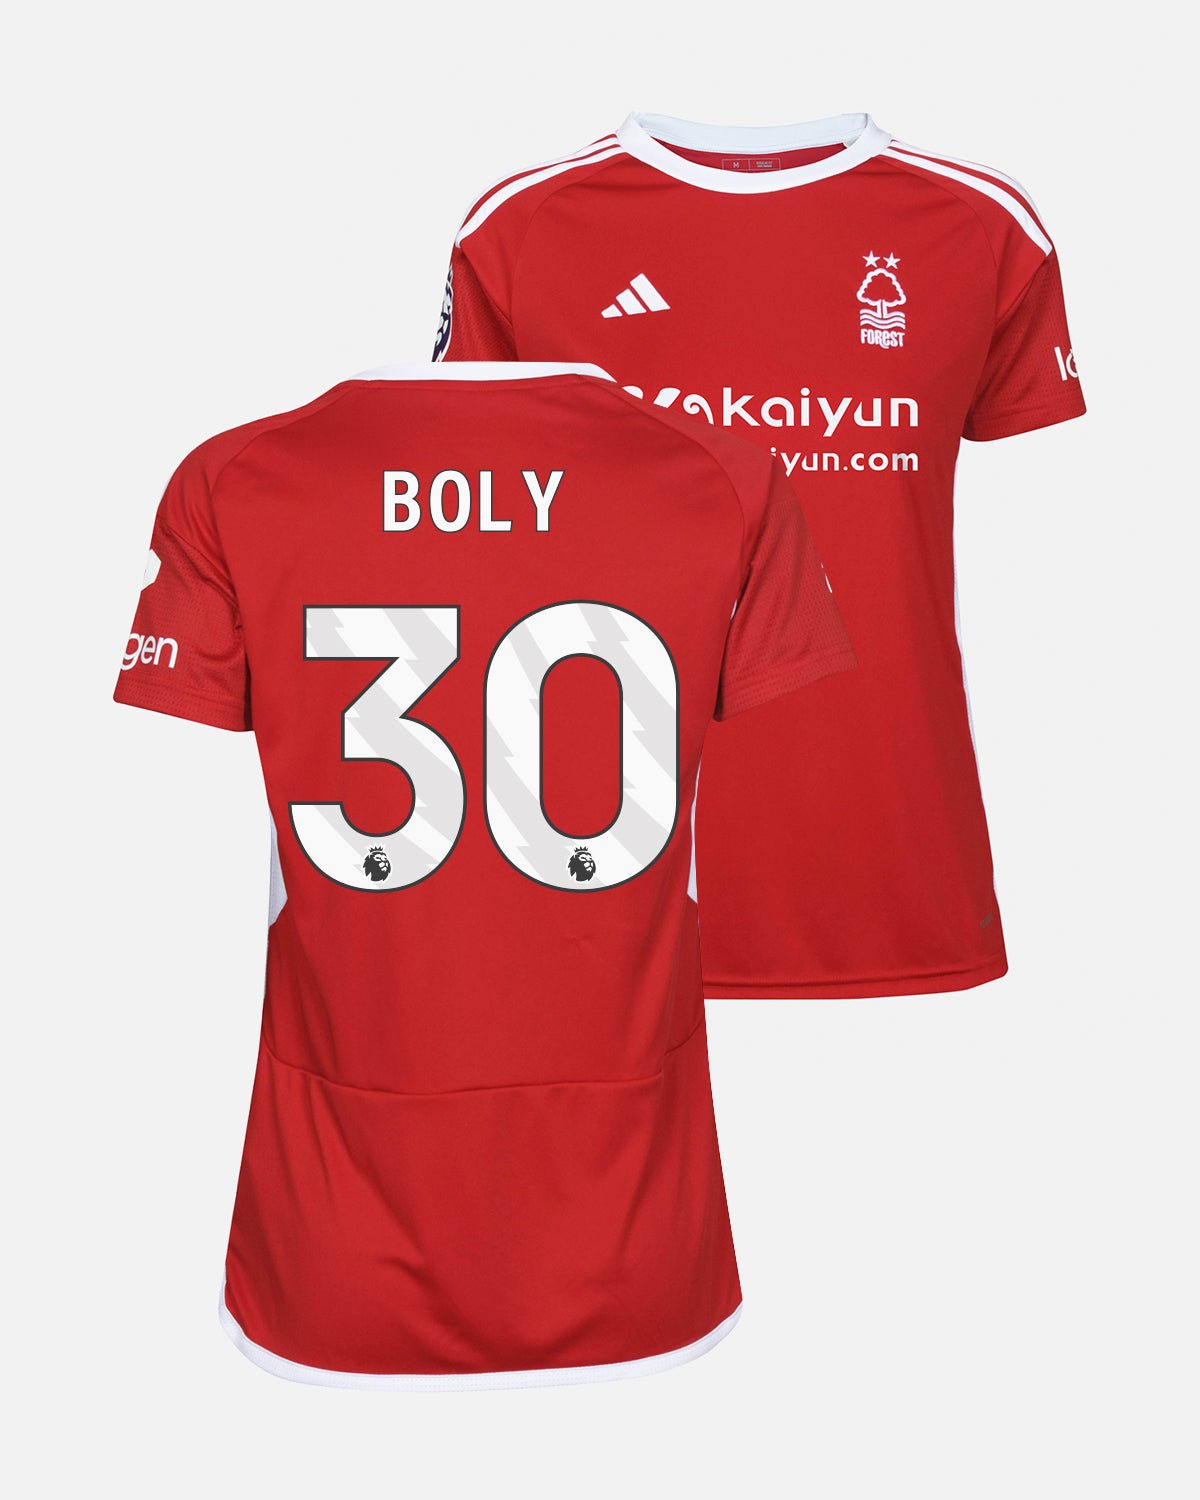 NFFC Women's Home Shirt 23-24 - Boly 30 - Nottingham Forest FC